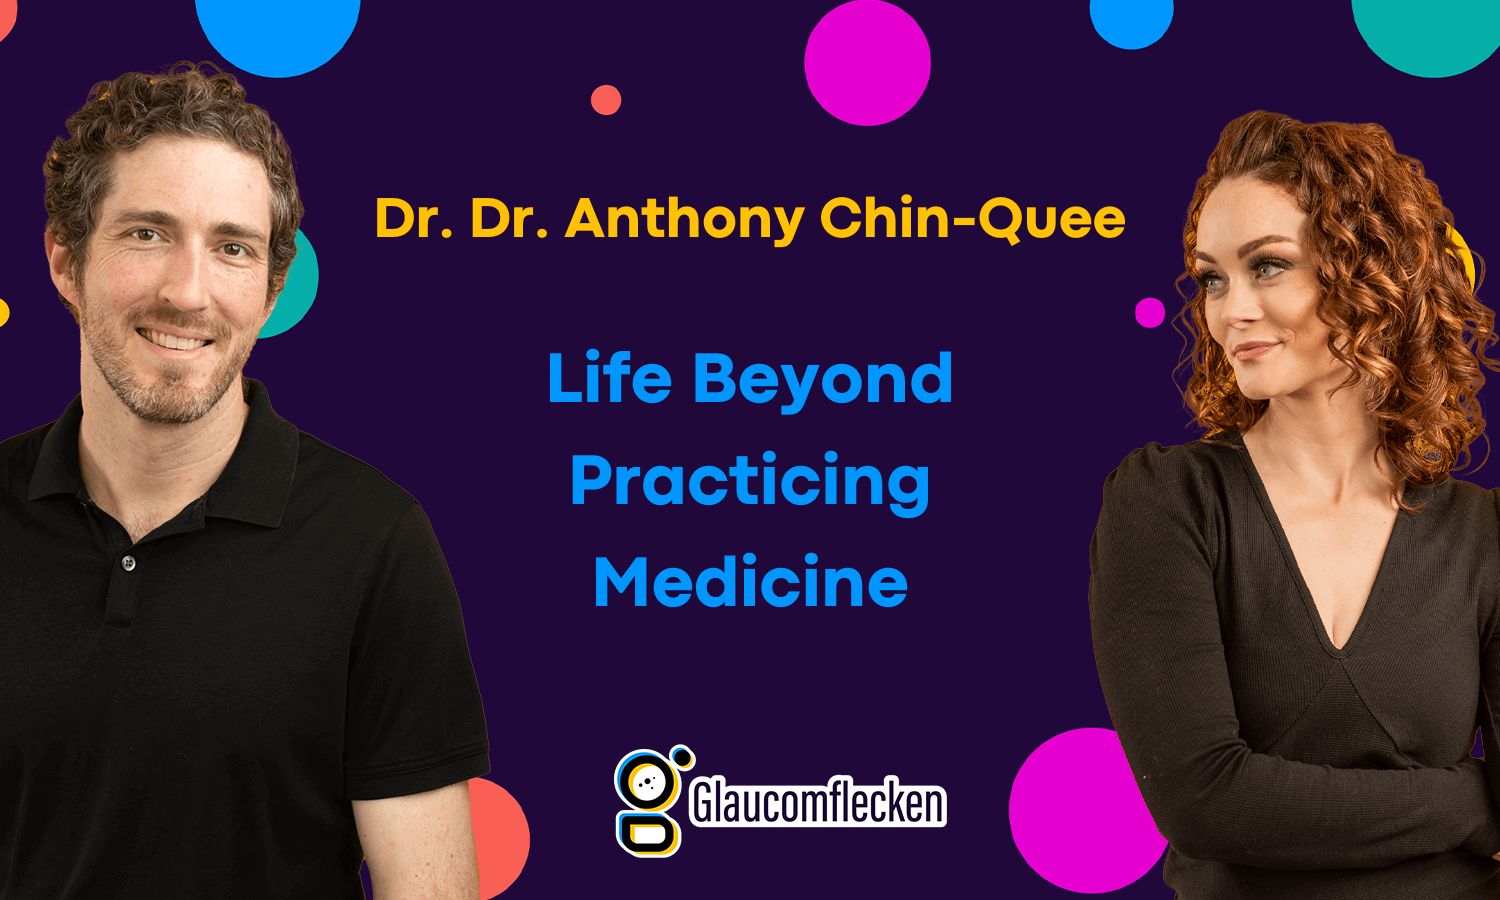 From Stethoscope To Storytelling: Finding Life And Fulfillment Beyond Practicing Medicine